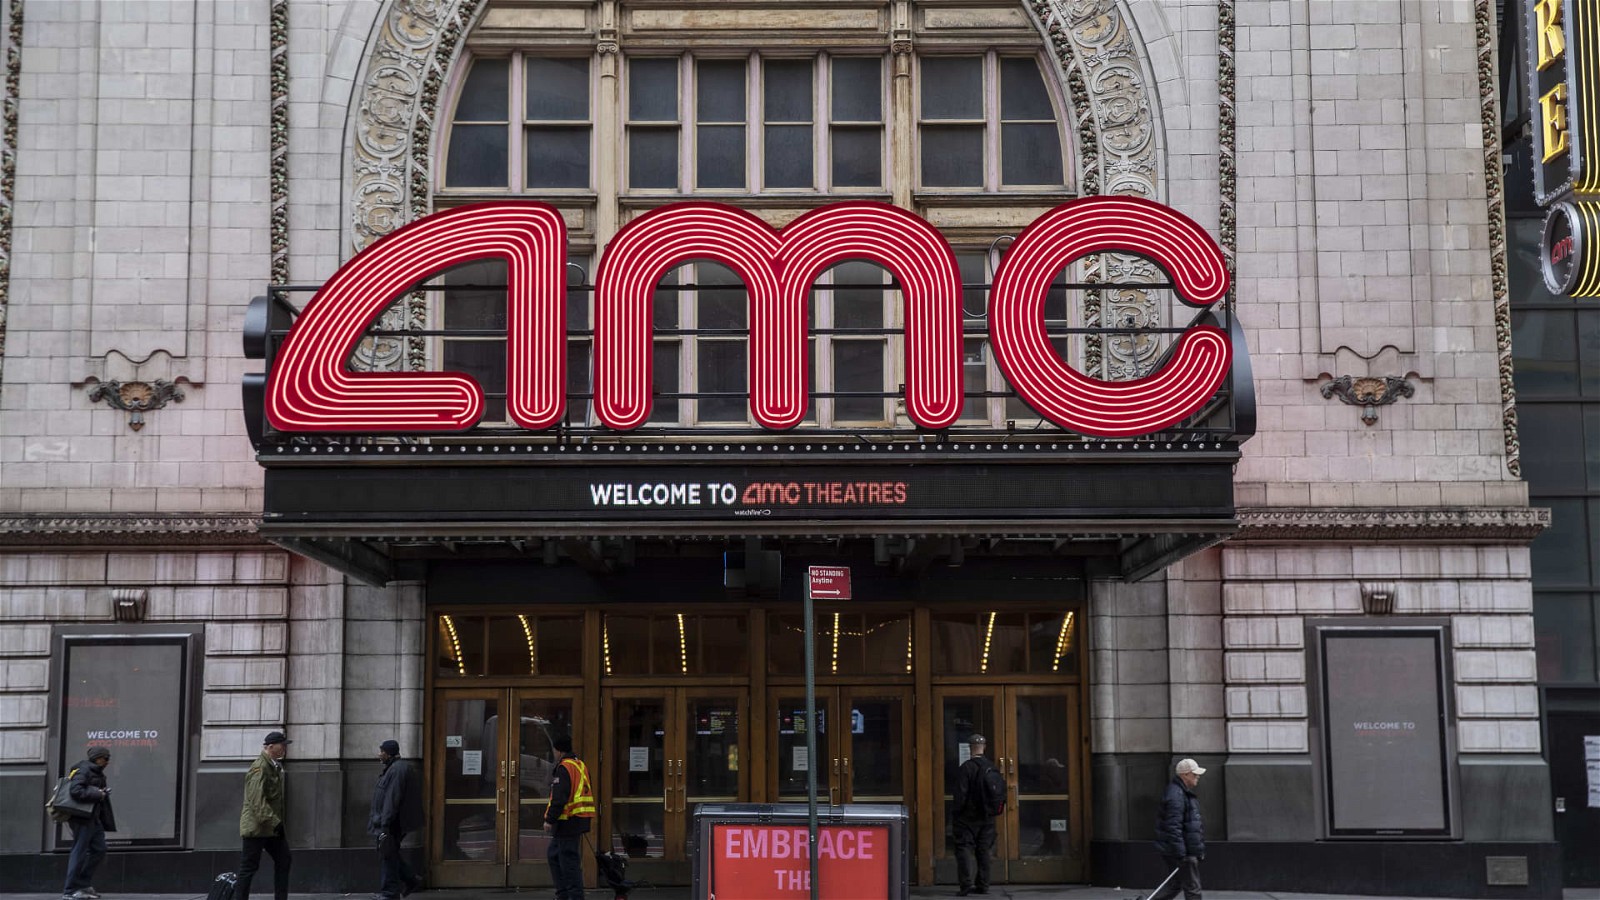 The theatre scene is set to change following new AMC model